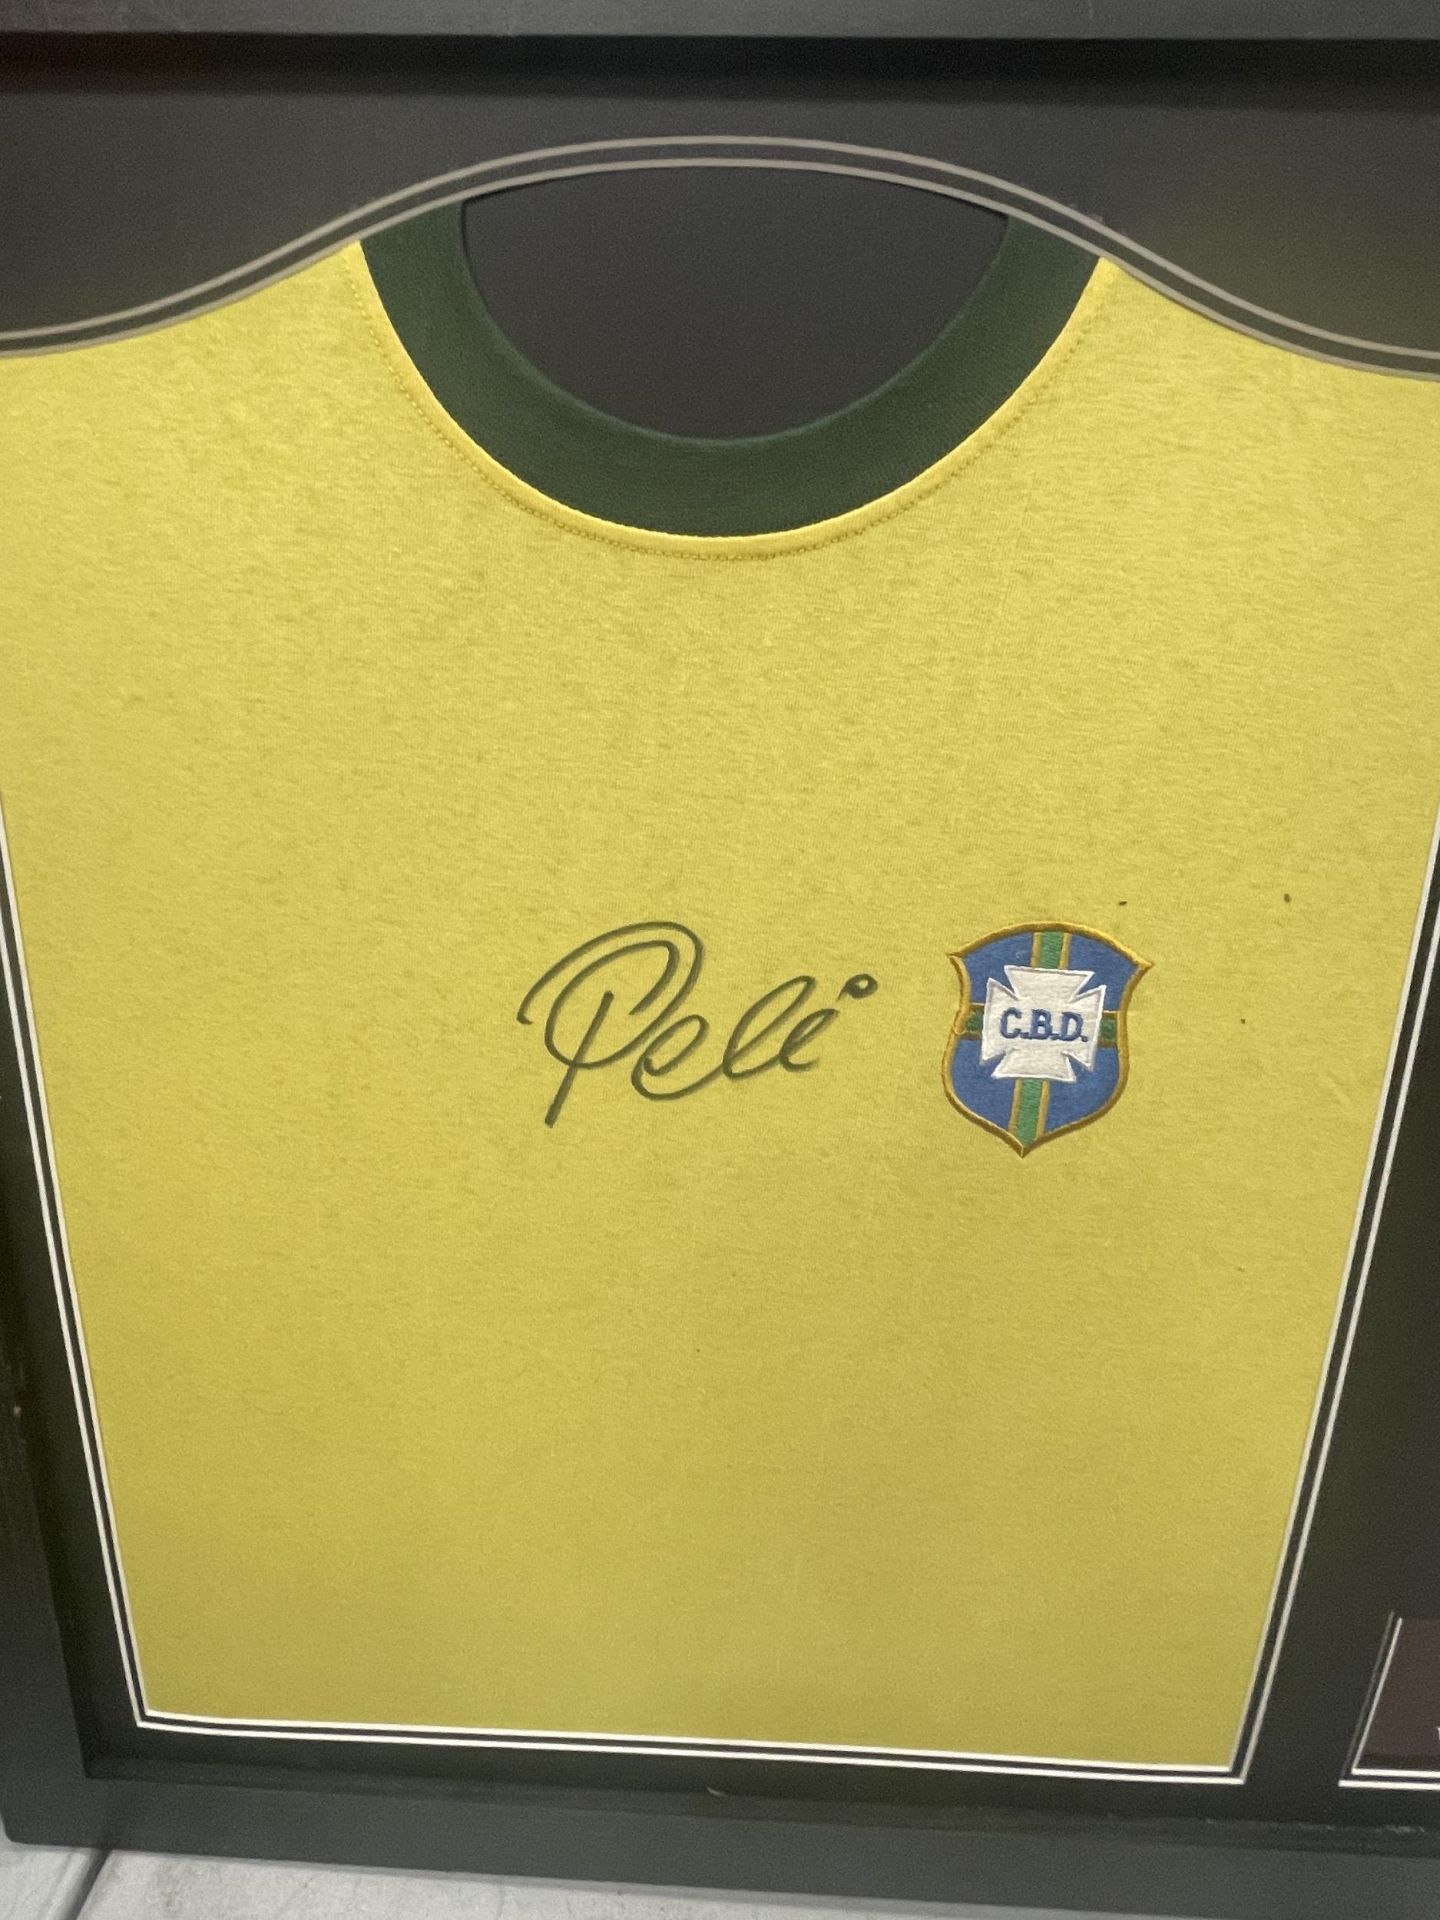 A FRAMED PELE FOOTBALL MONTAGE WITH SIGNED SHIRT, WITH ALL STAR SIGNINGS CERTIFICATE OF AUTHENTICITY - Image 2 of 4